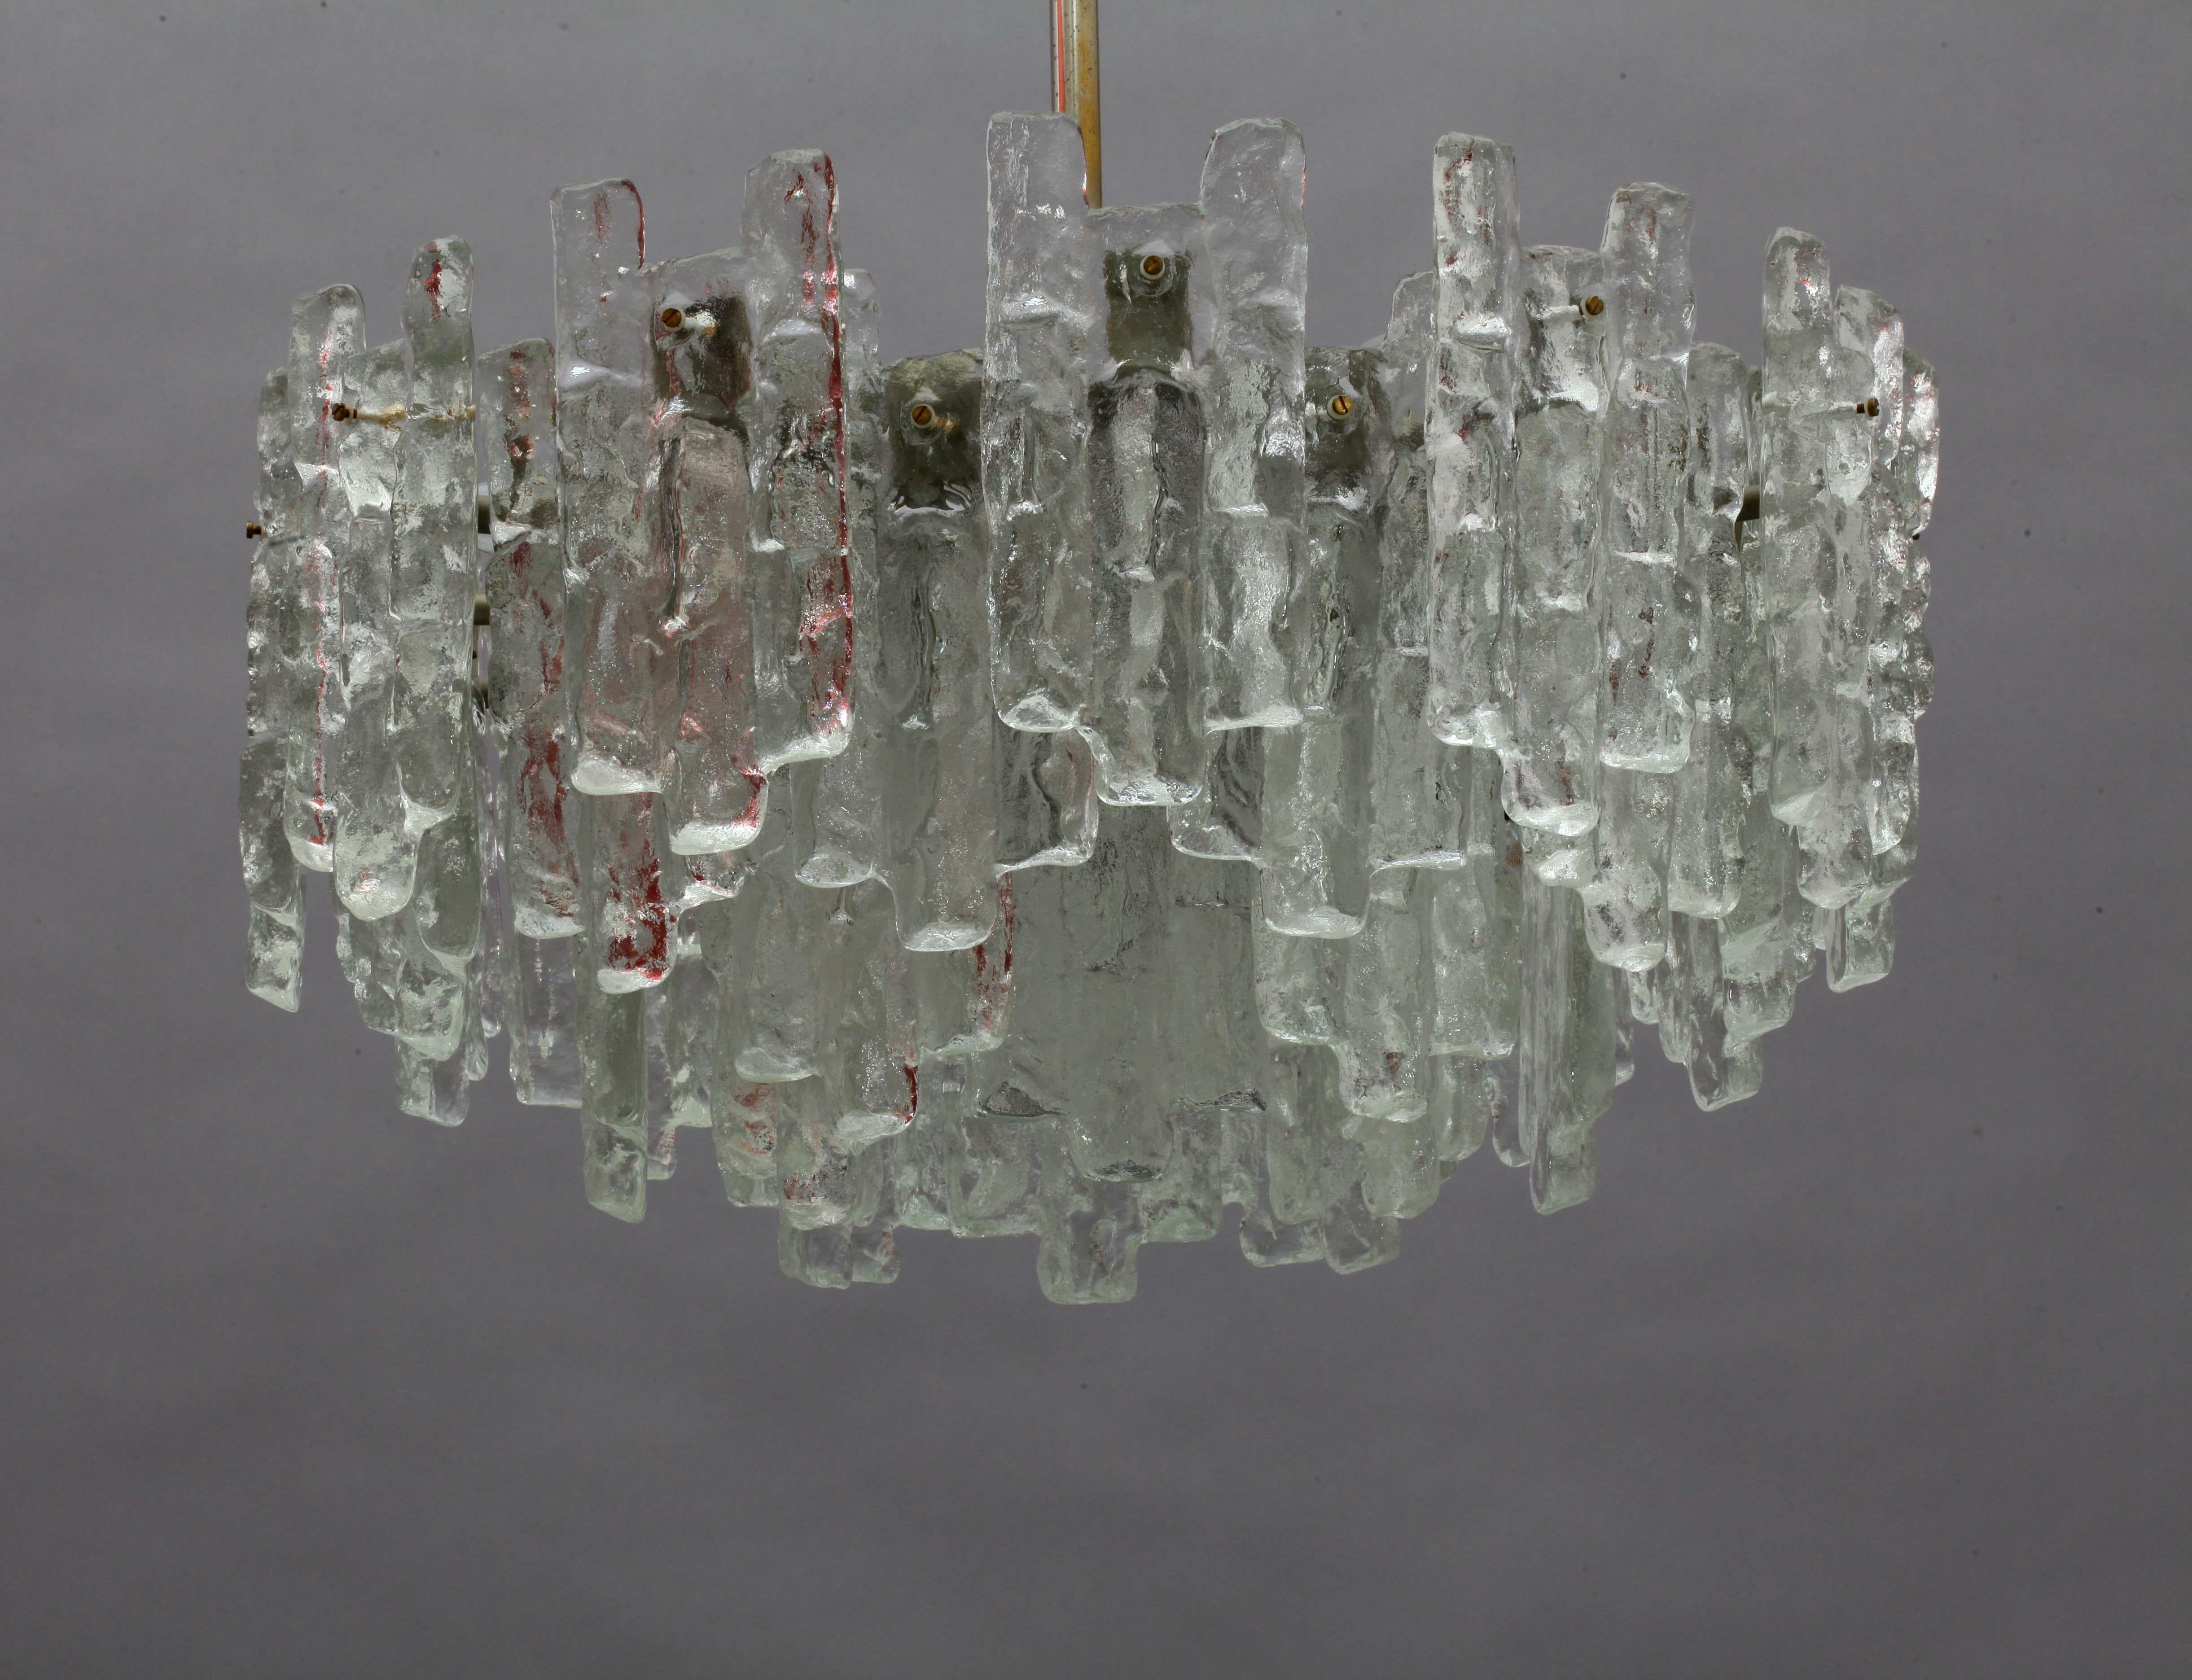 Extra large light fixture model 'SORIA' by Kalmar, Austria, manufactured in midcentury, circa 1960 (late 1960s-early 1970s). These chandeliers are the largest version of this series.

A silver painted metal frame holds 48 large textured and